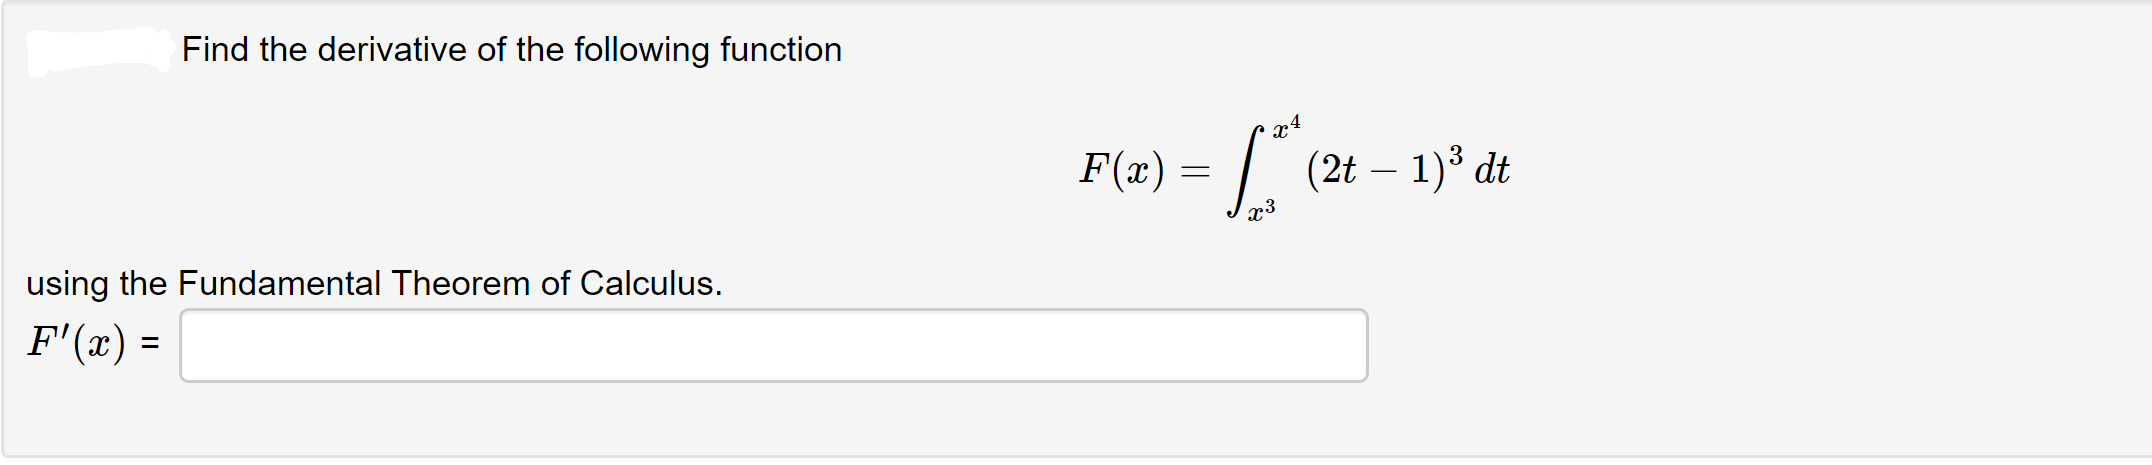 Find the derivative of the following function
x4
F(x) =
(2t – 1)3 dt
using the Fundamental Theorem of Calculus.
F'(x) =
